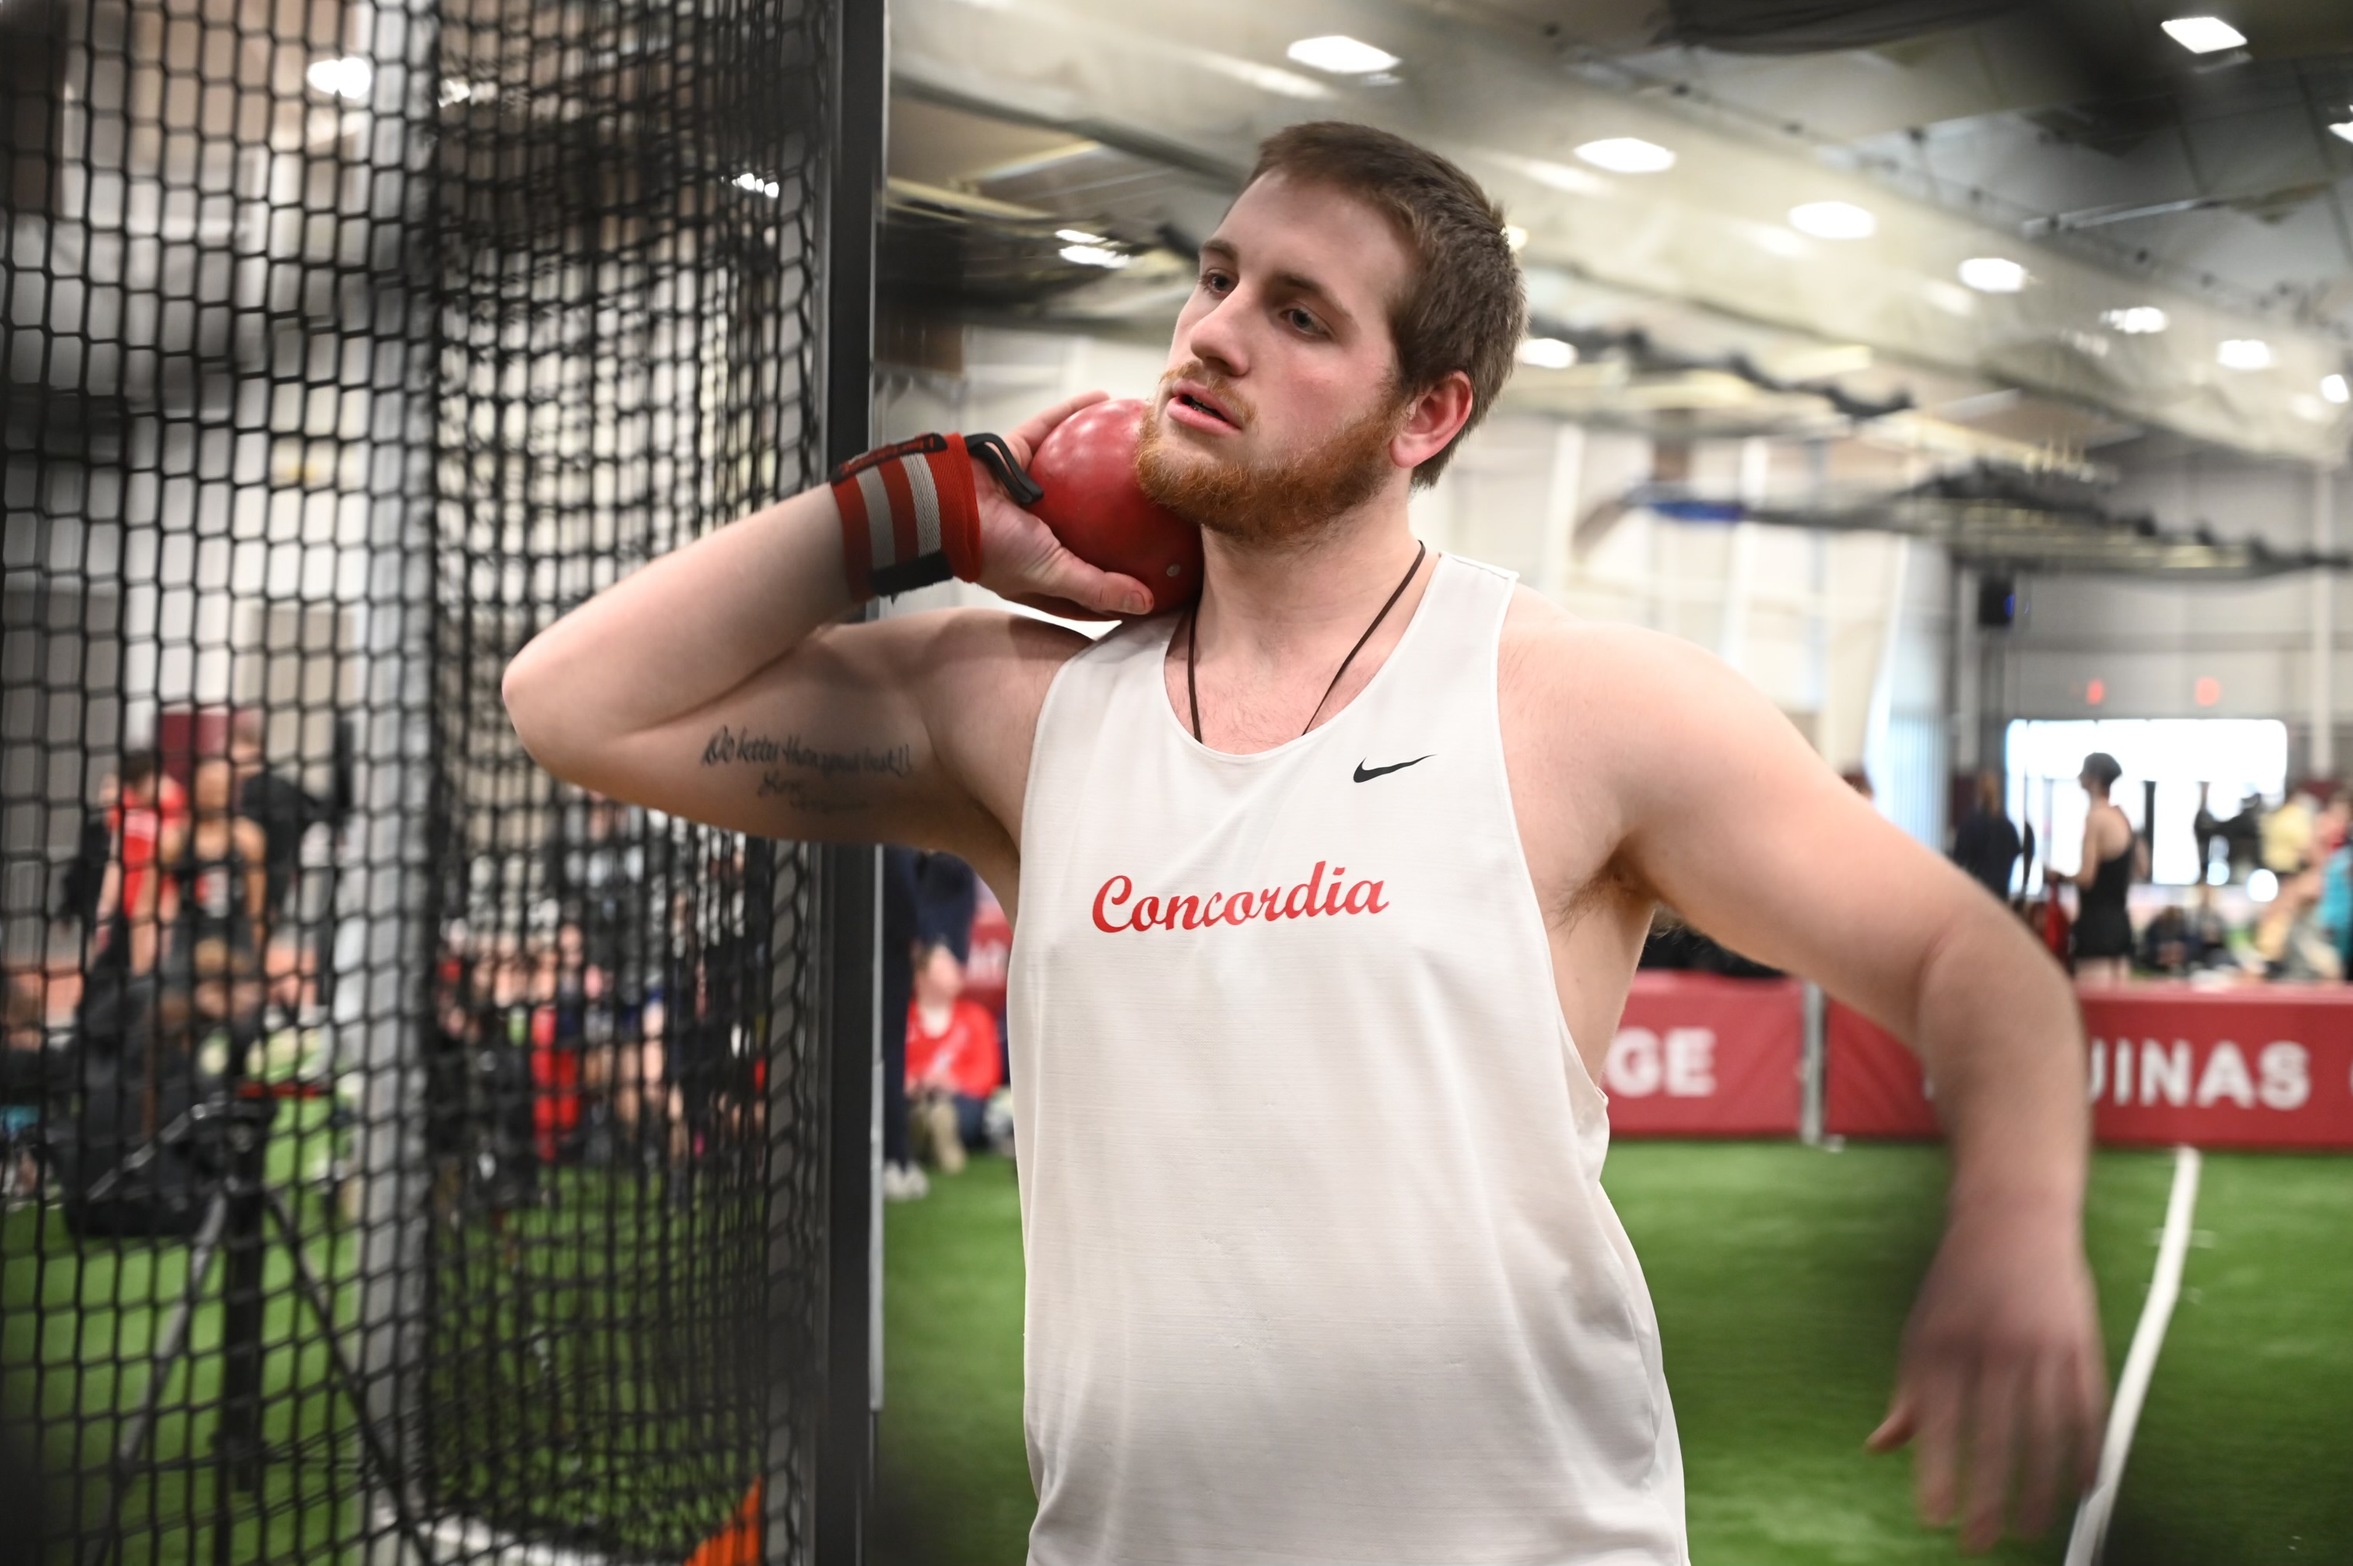 WHAC CHAMPIONSHIP: Lietzow wins Shot Put in Dramatic Fashion, as Men's Team finishes 7th